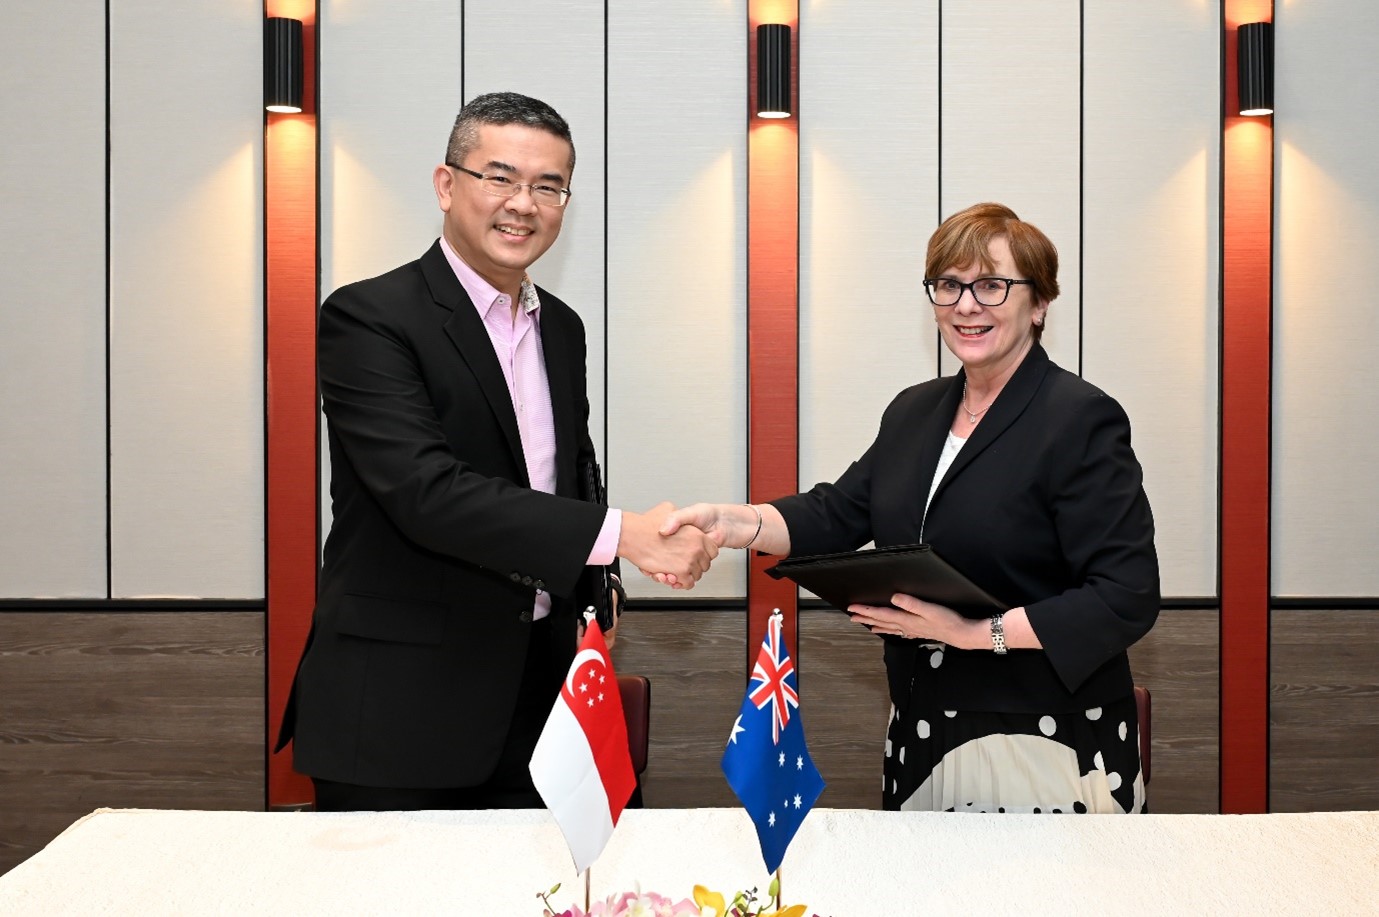 ACMA Chairman, Mrs Nerida O'Loughlin and IMDA CEO, Mr Lew Chuen Hong, shook hands after the signed MOU as part of combating online scams